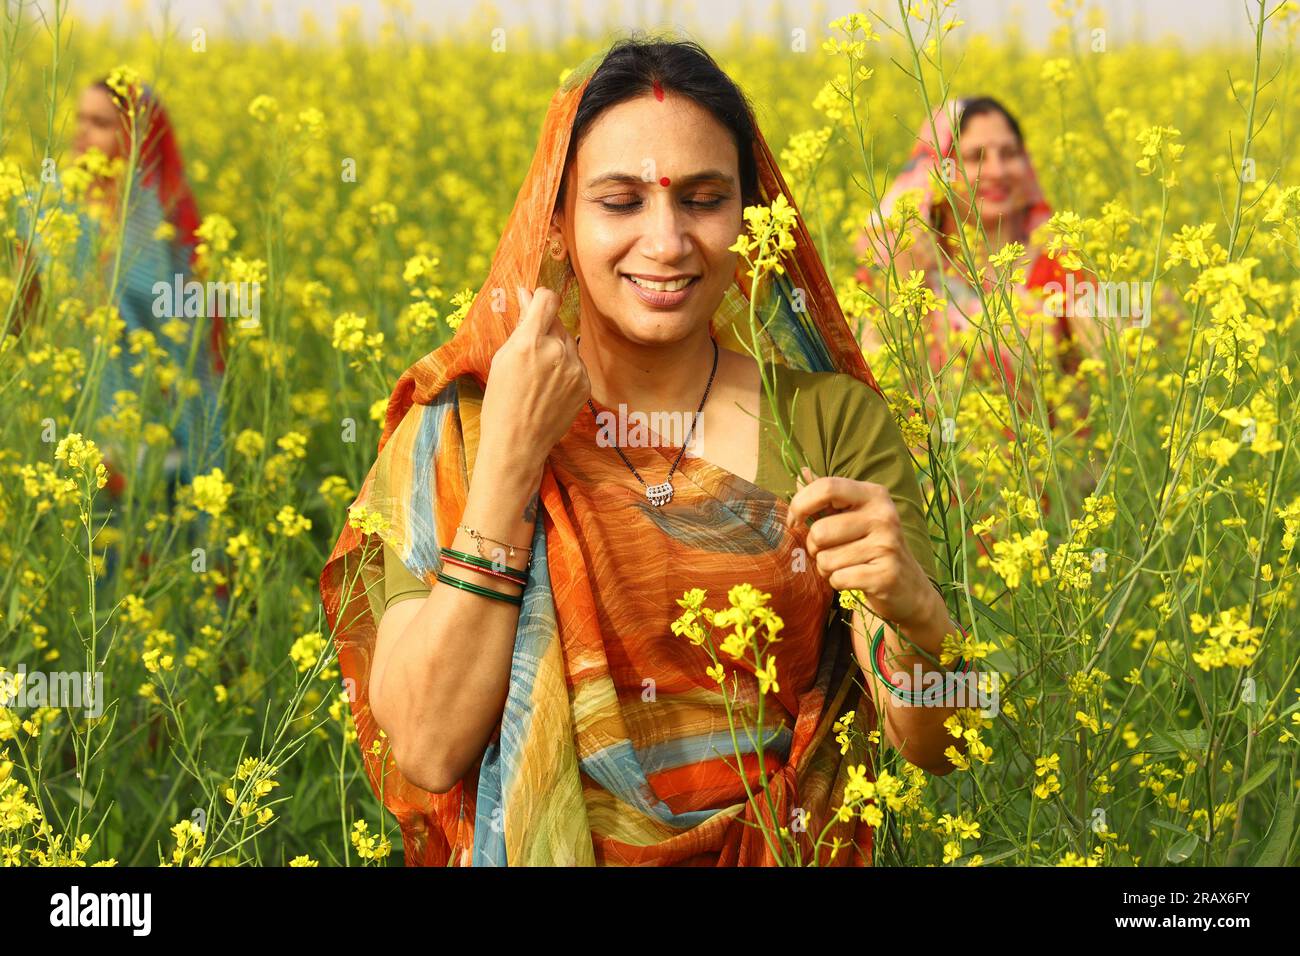 Happy rural Indian women standing in a mustard field enjoying the benefits of the mustard agricultural field. Stock Photo